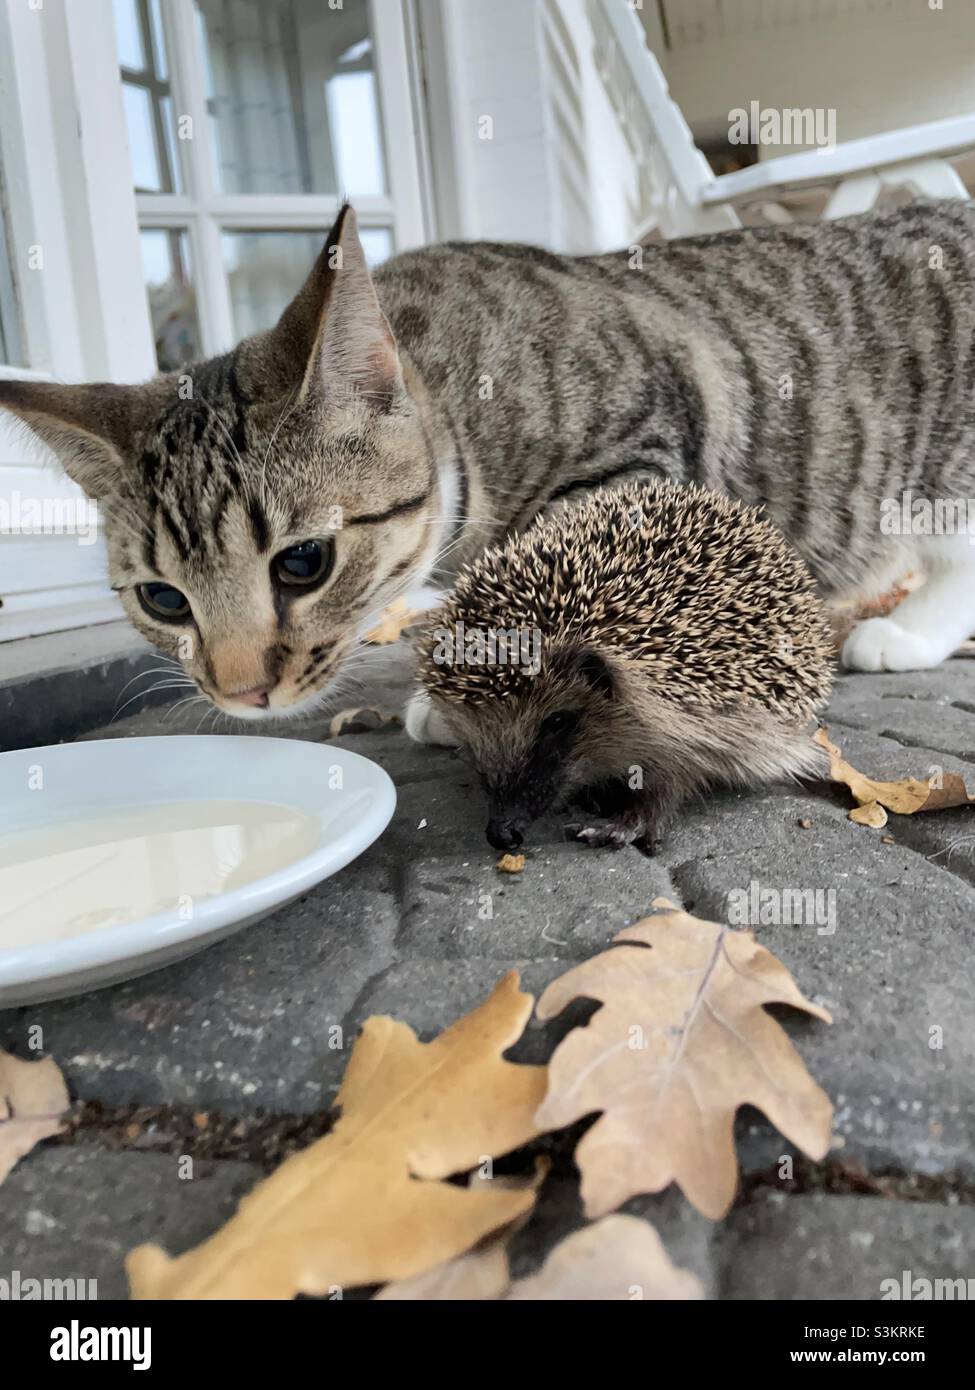 The Cat and the Hedgehog. Stock Photo